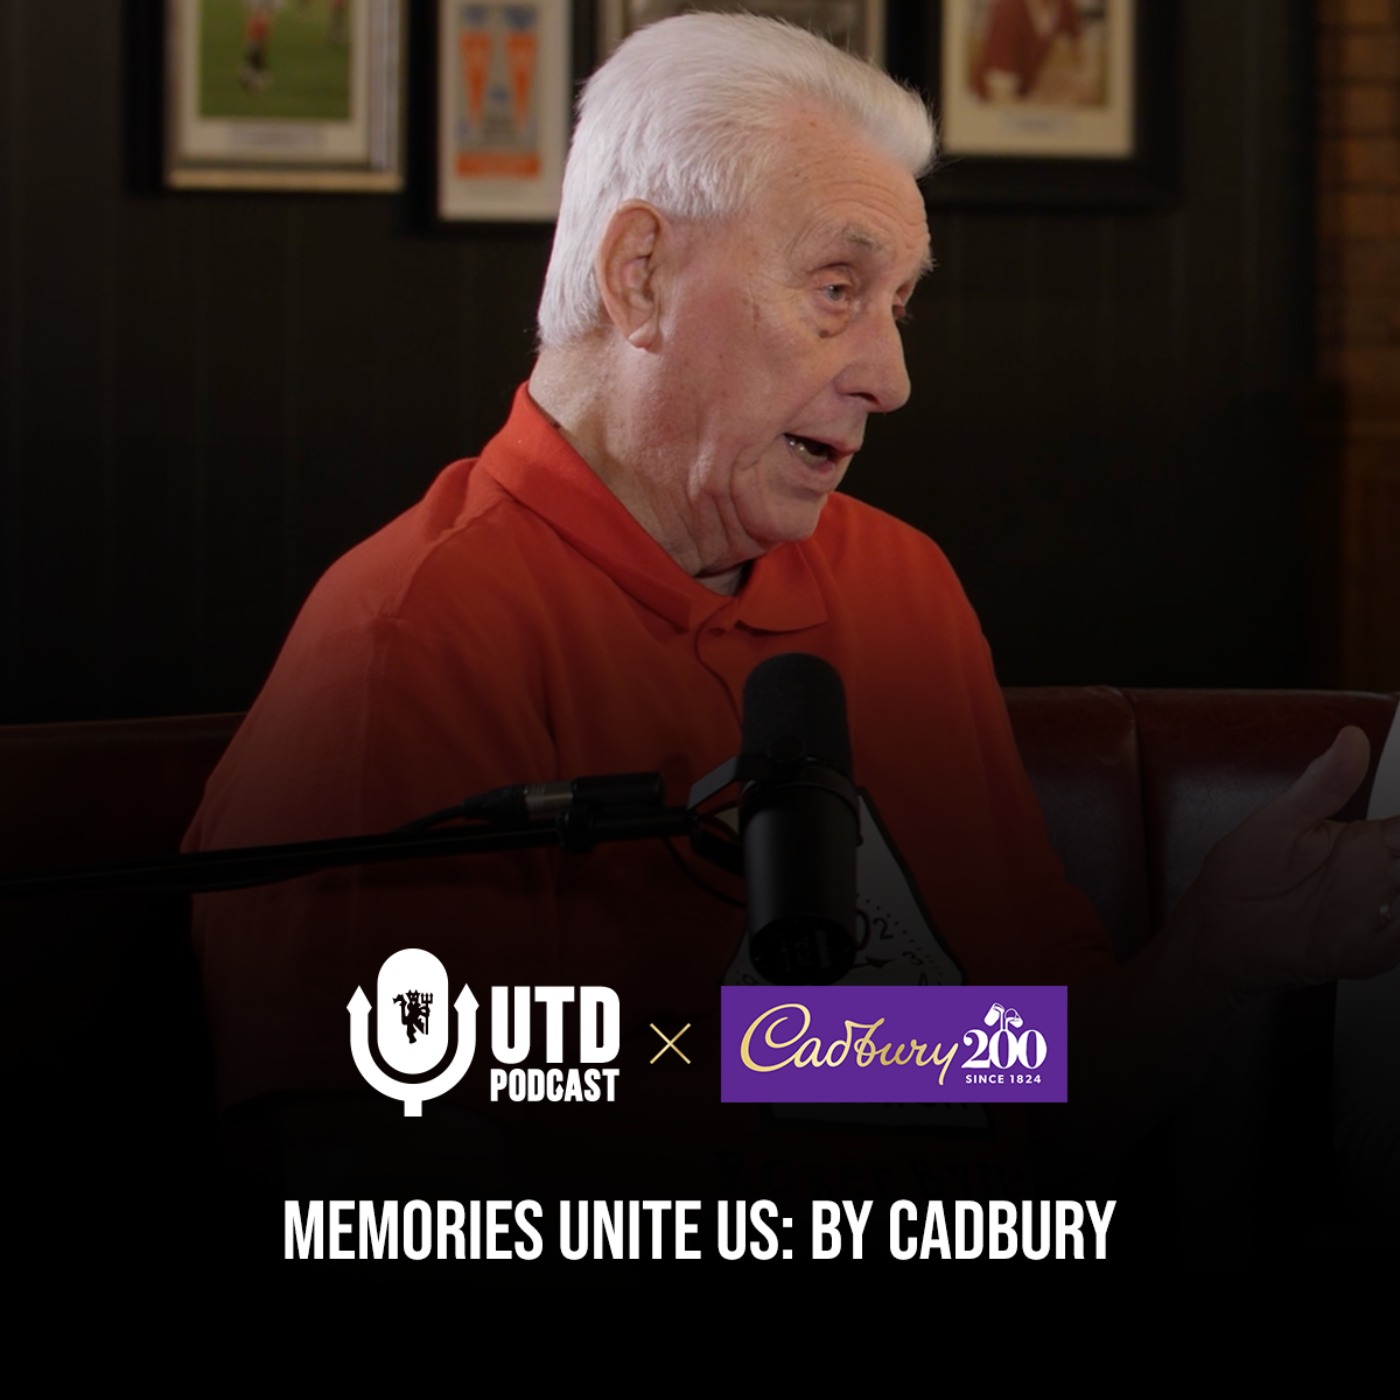 Memories unite us: Brought to you by Cadbury